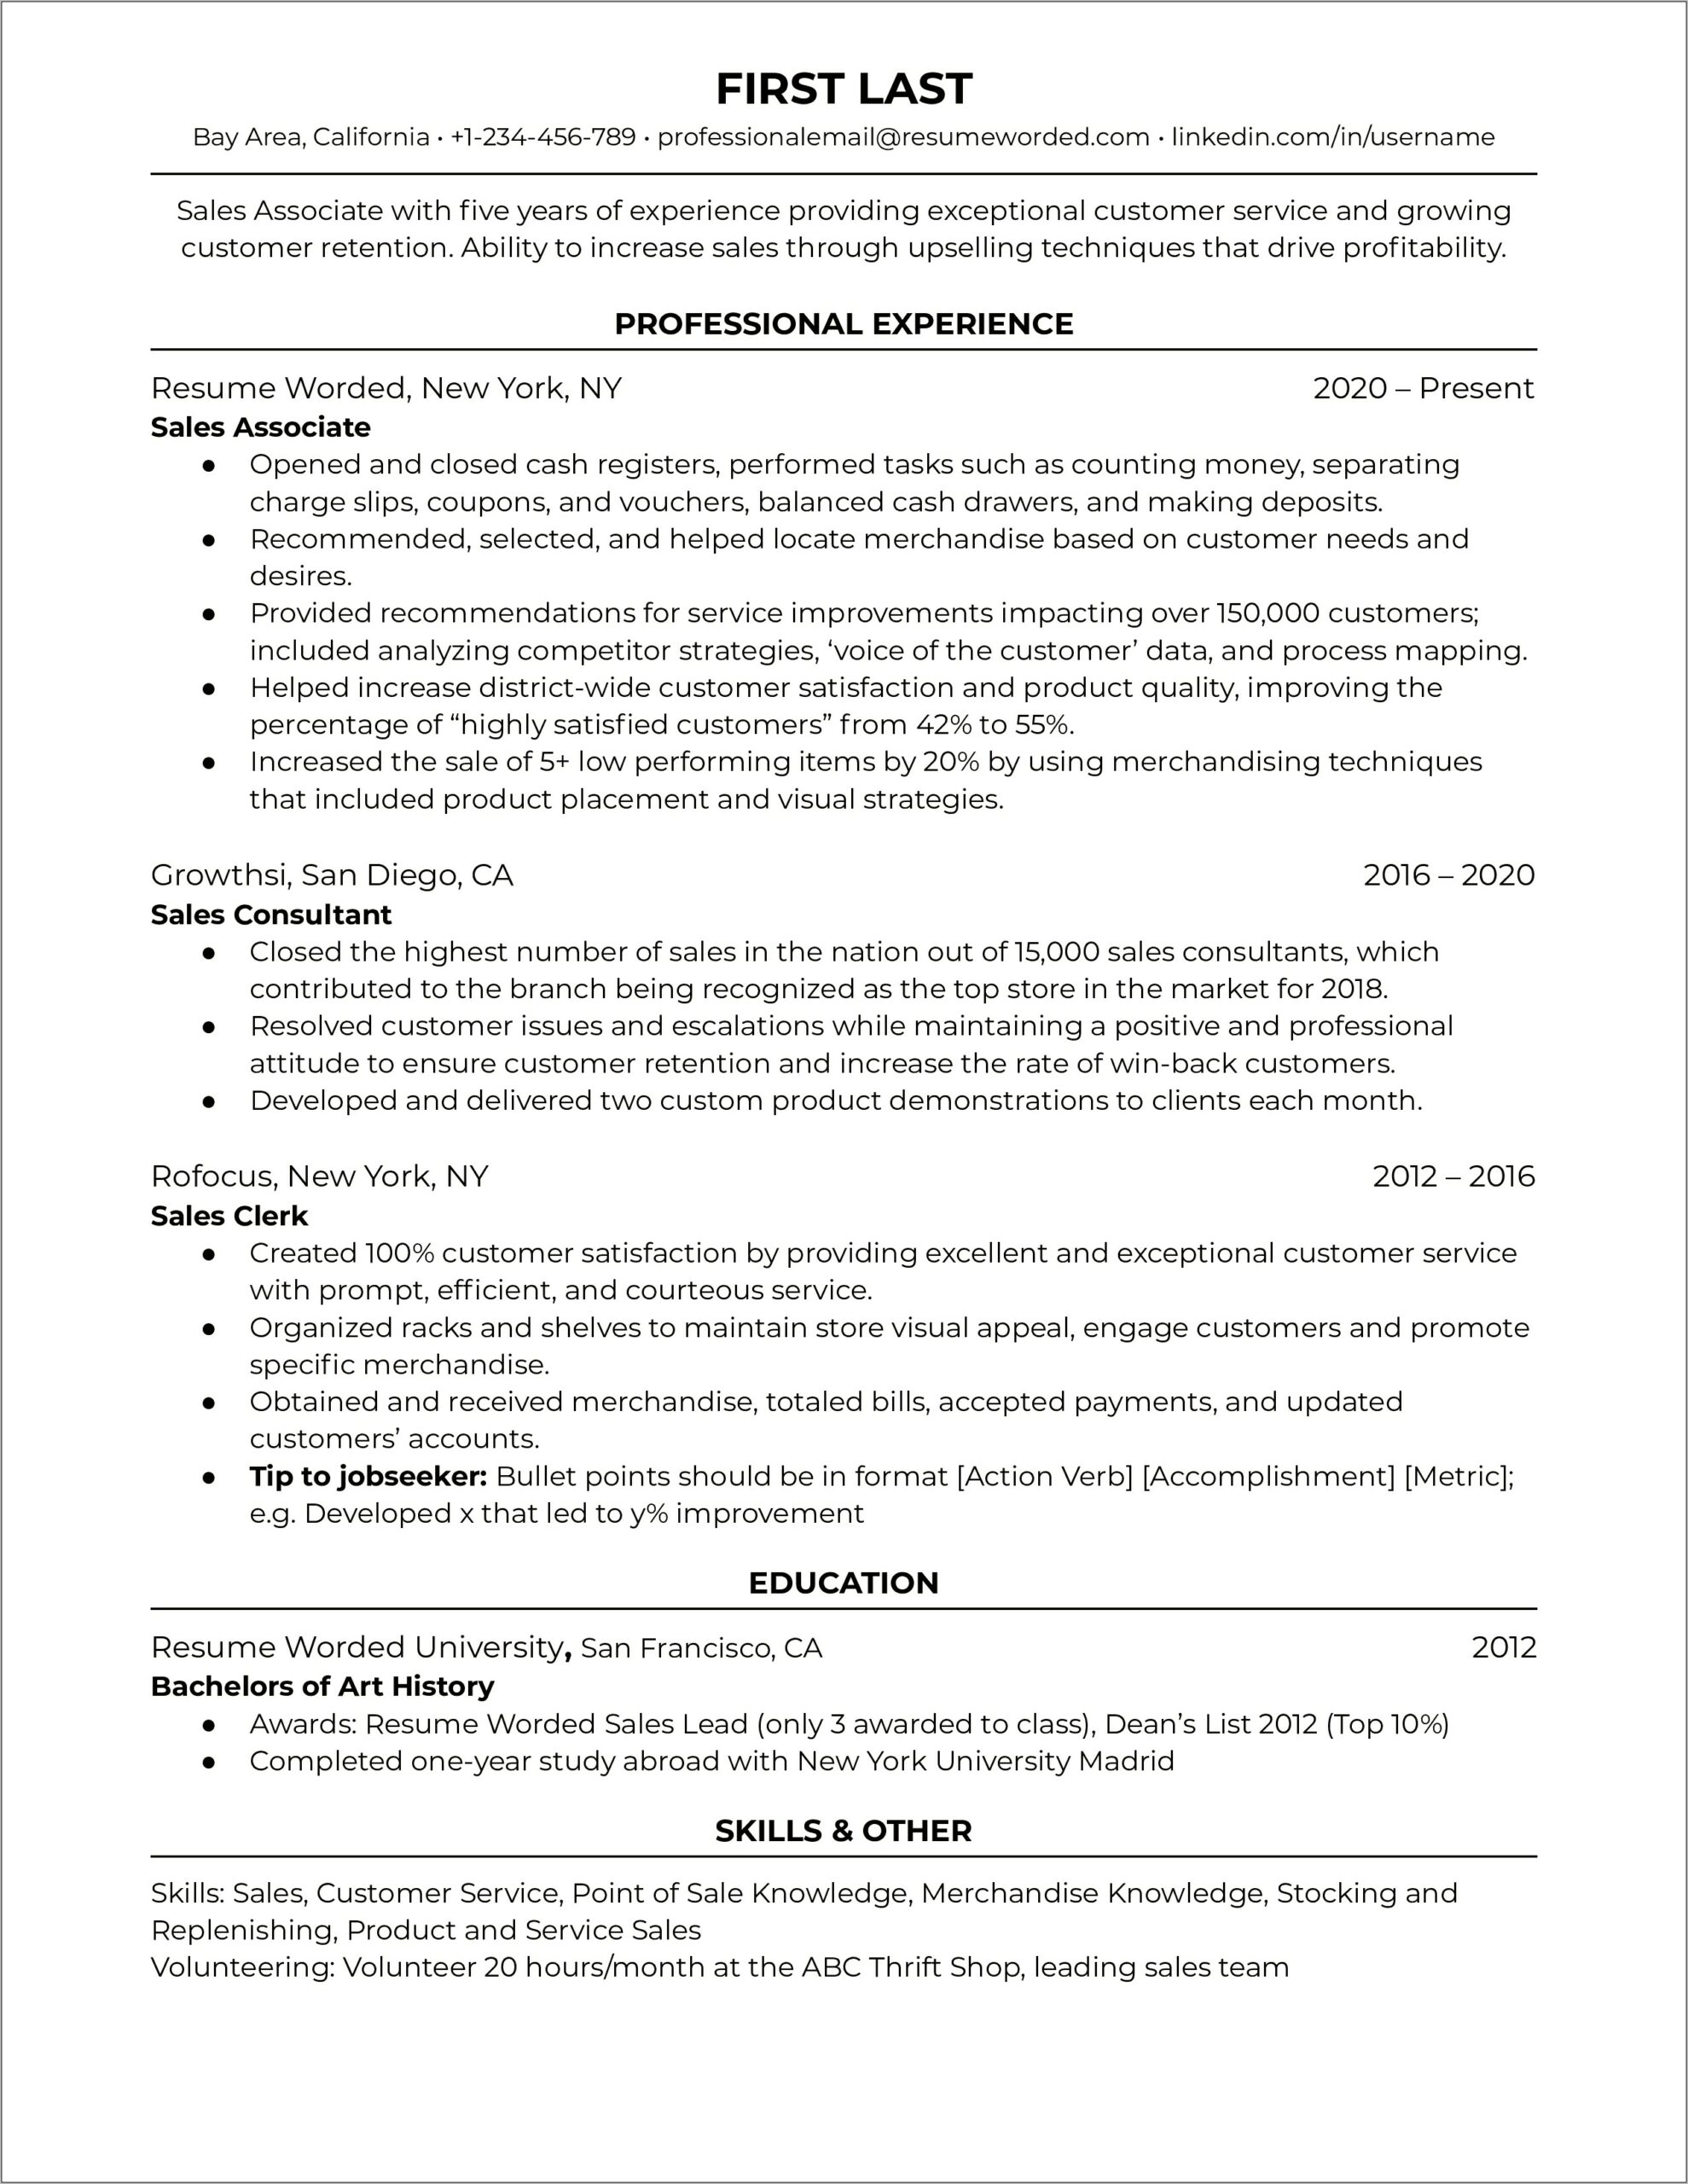 Sales Achievement Examples For Resume